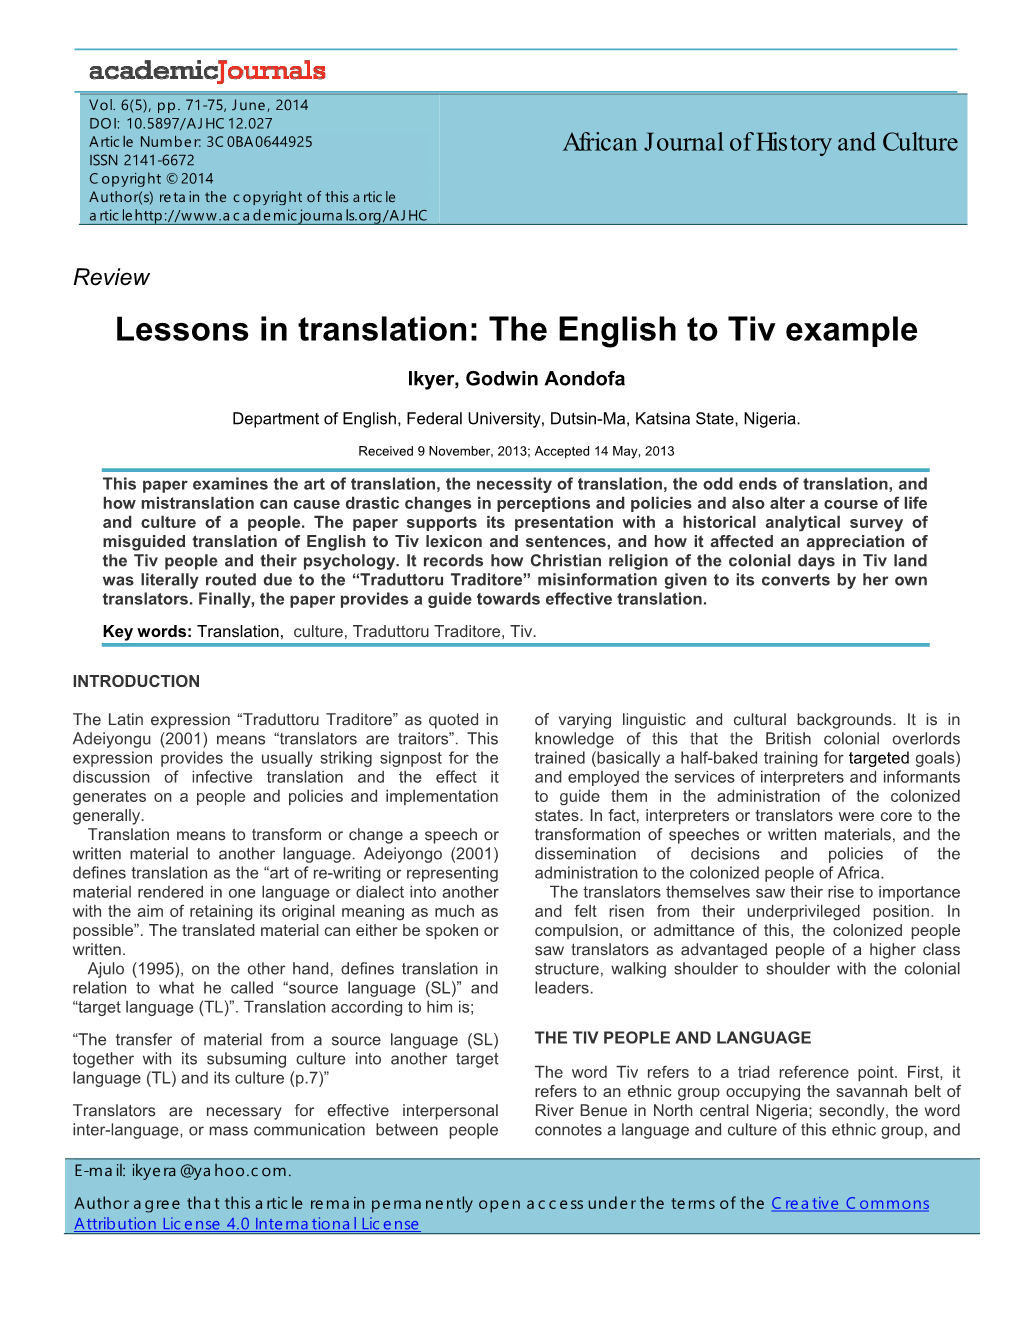 Lessons in Translation: the English to Tiv Example